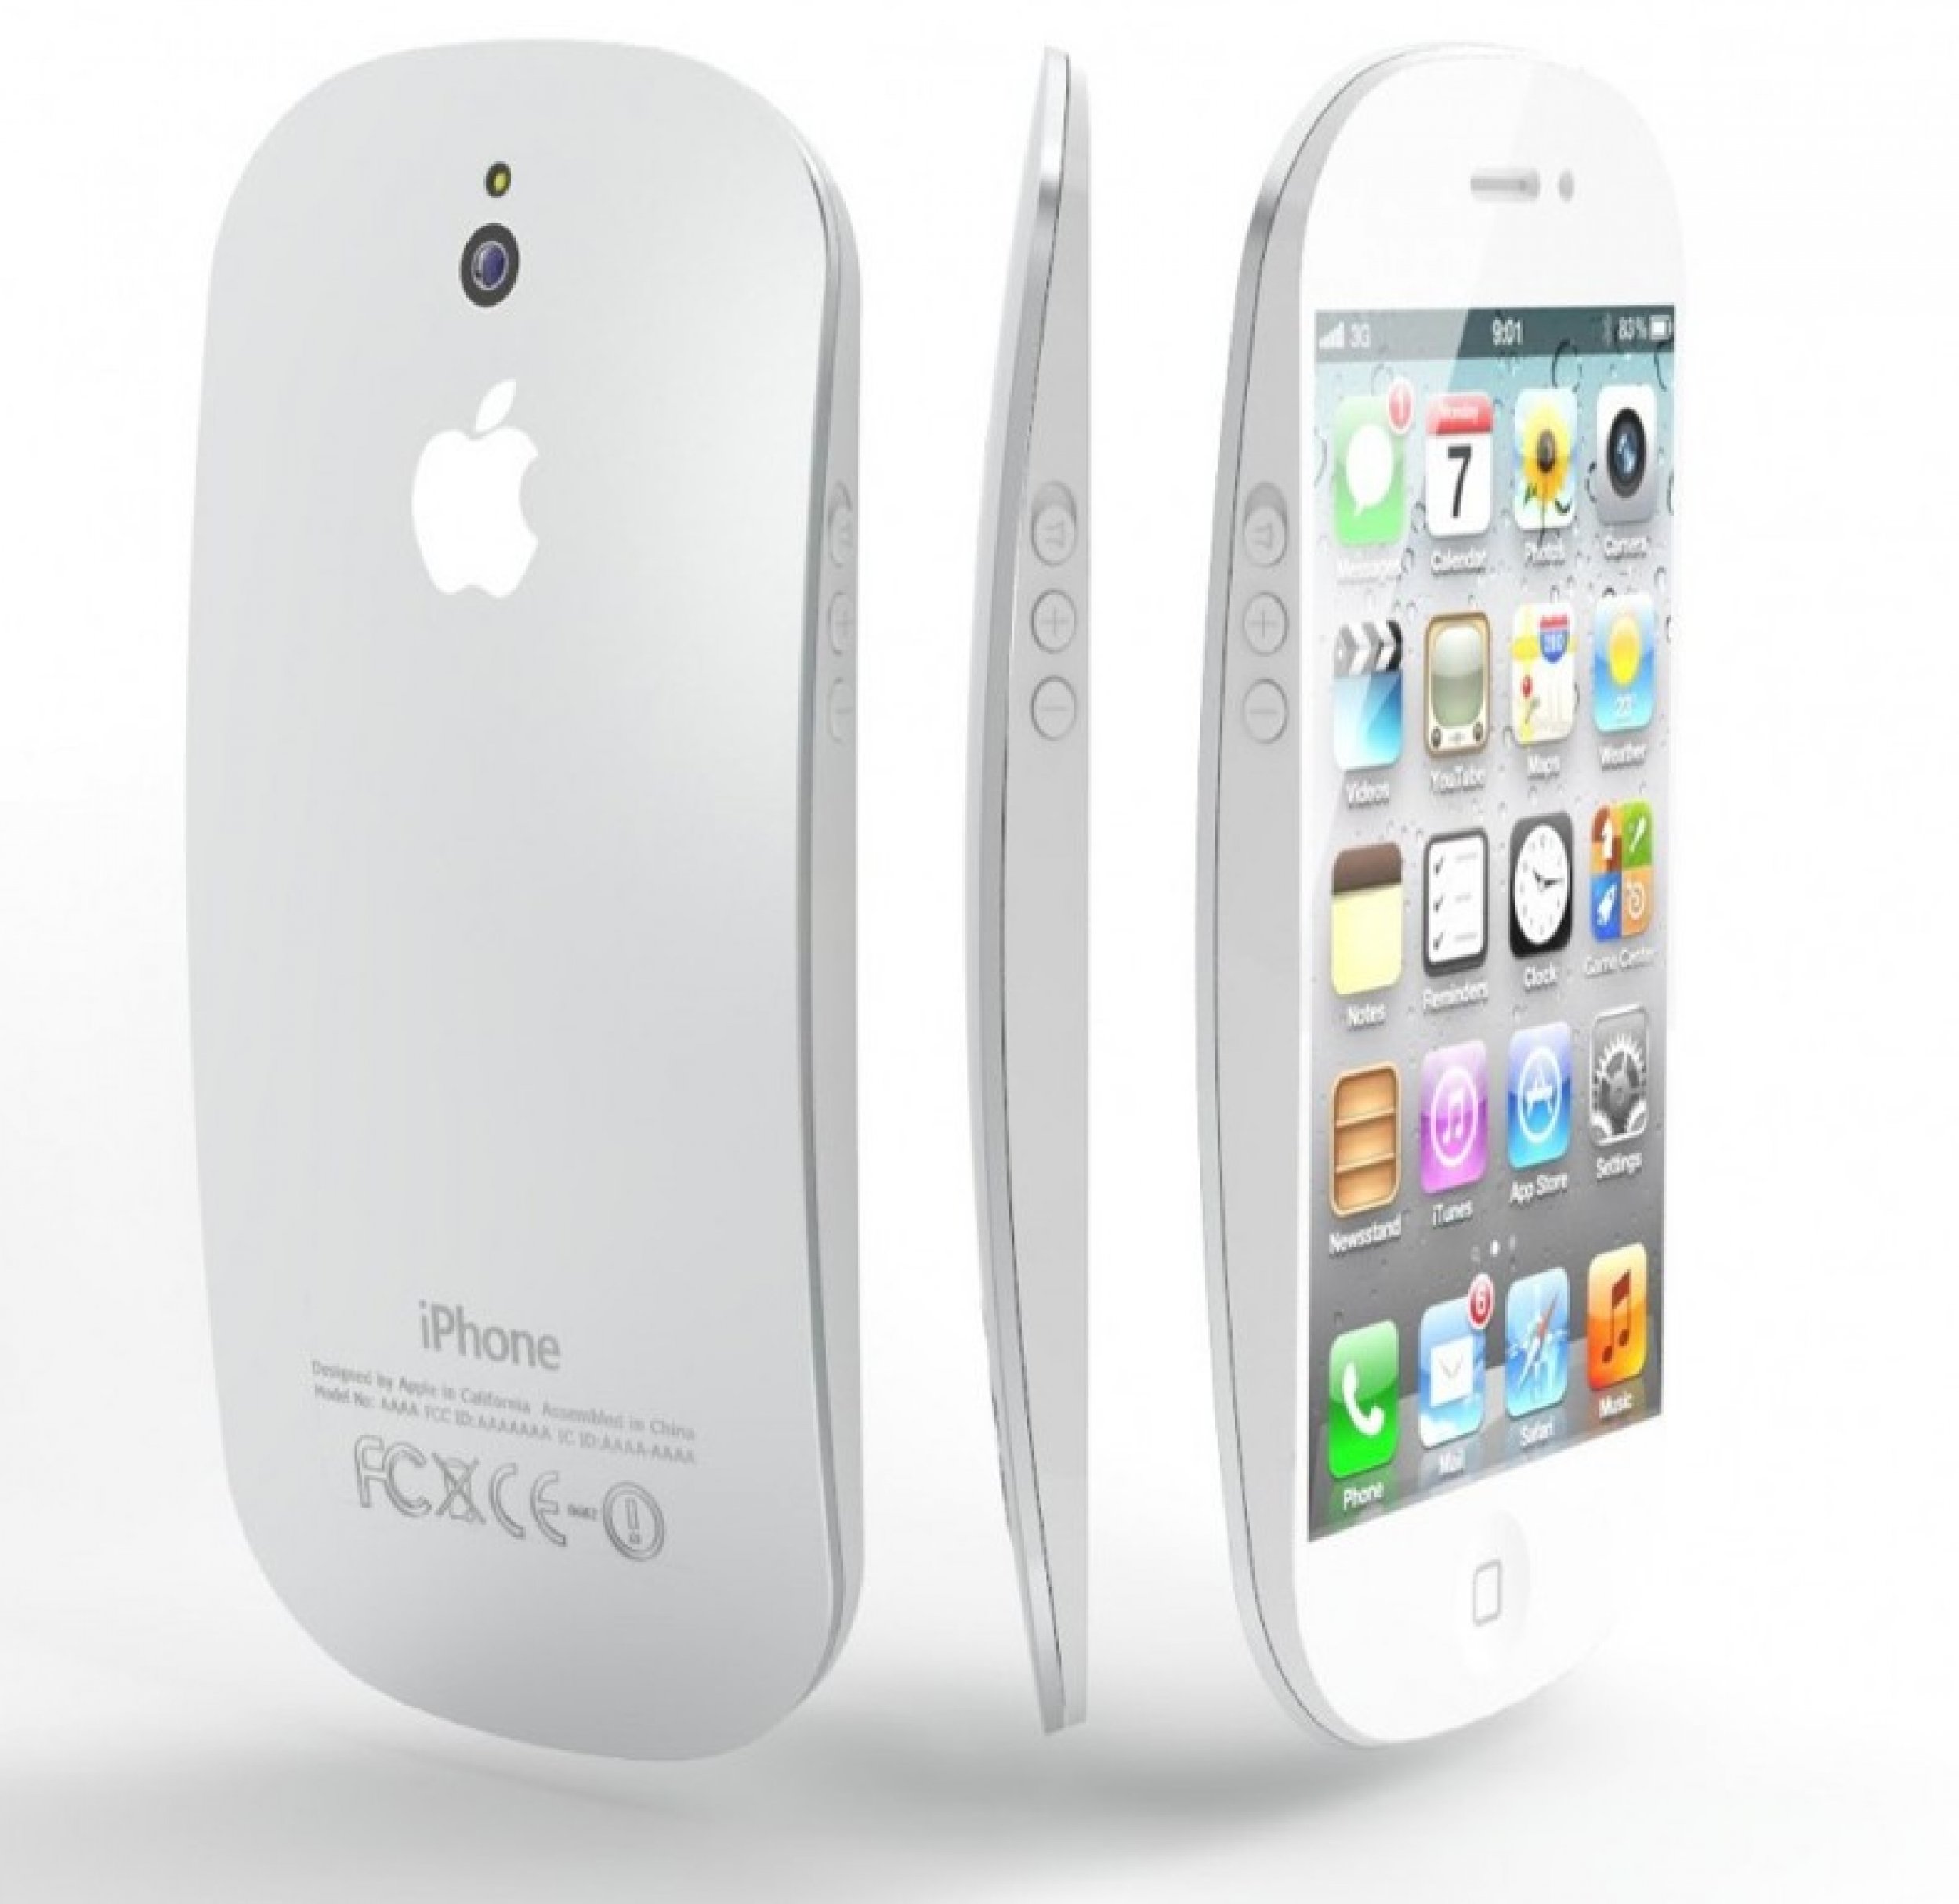 iPhone 5 Concept - Design by Federico Ciccarese